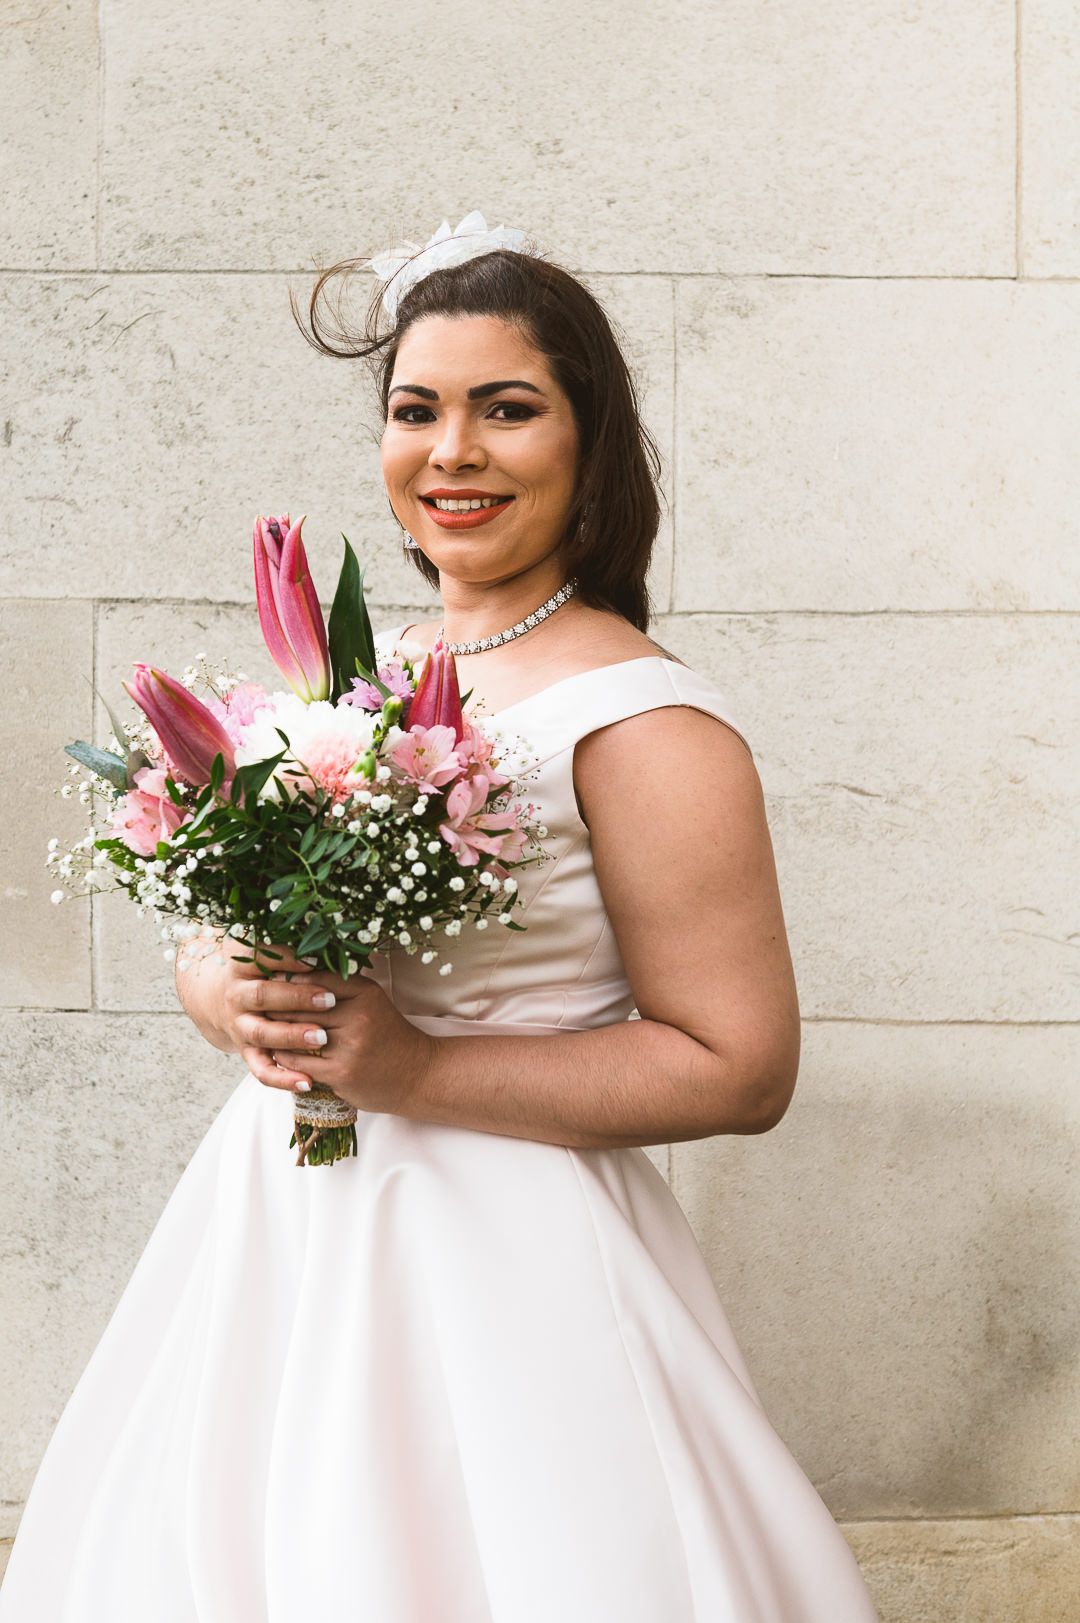 the bride stands with her flowers in front of a stone wall